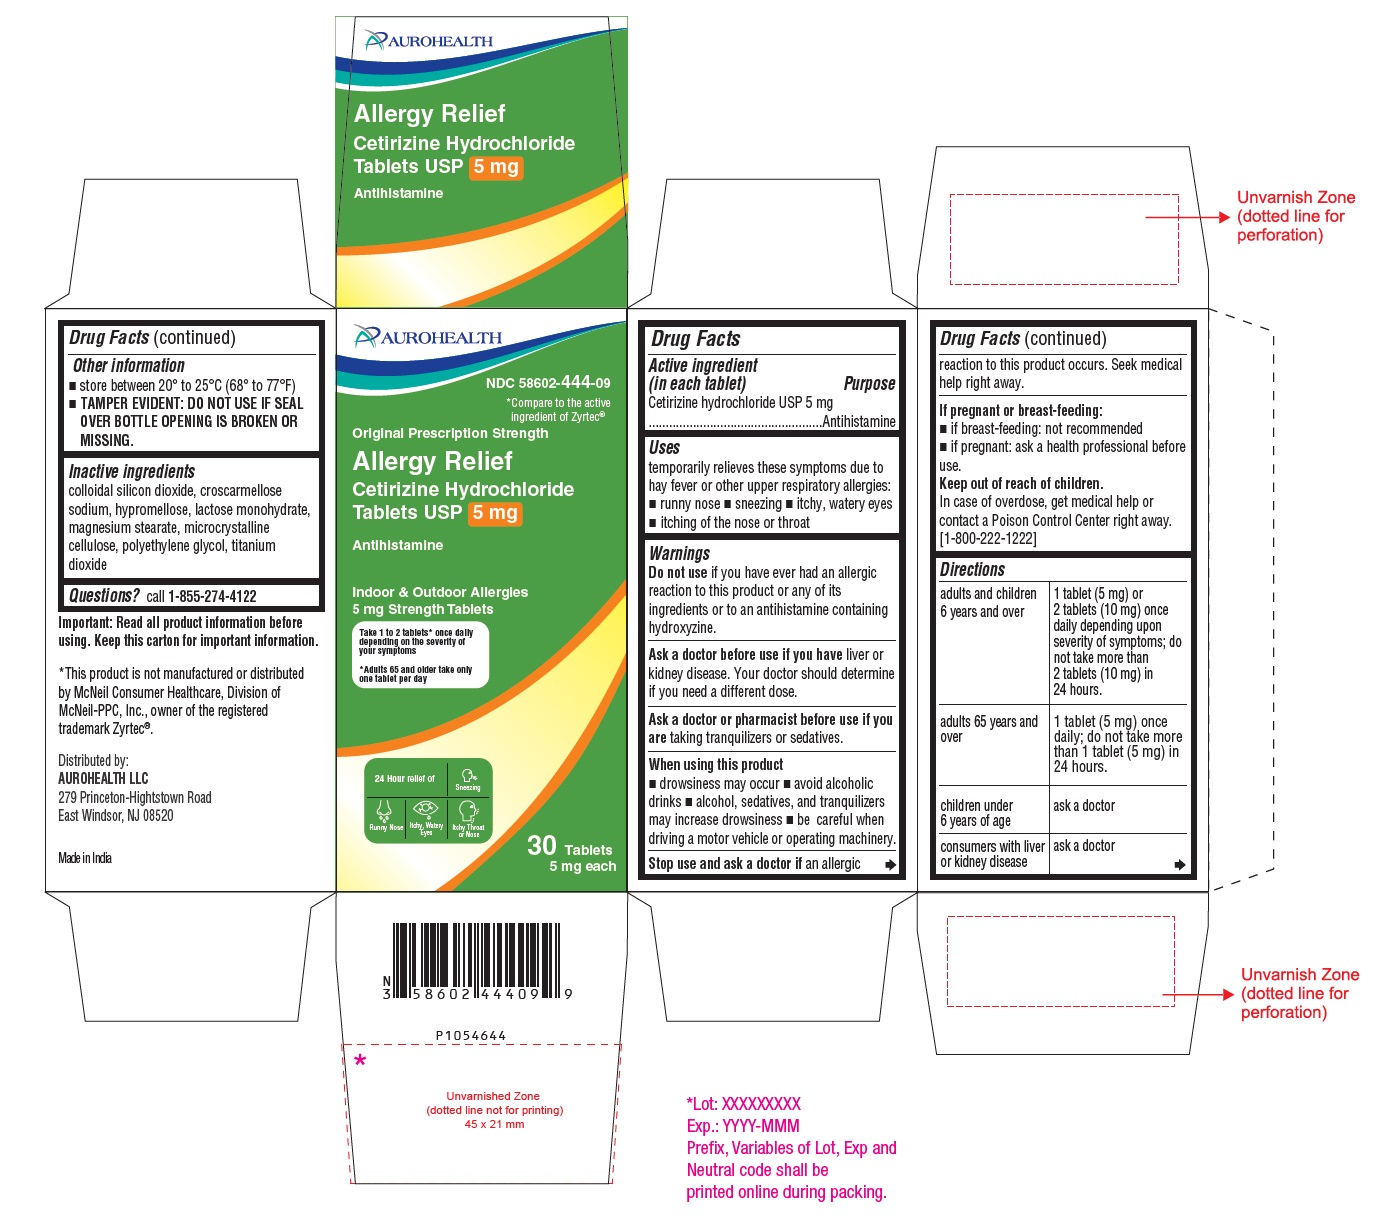 PACKAGE LABEL-PRINCIPAL DISPLAY PANEL - 5 mg (30's Tablet Container Carton Label)